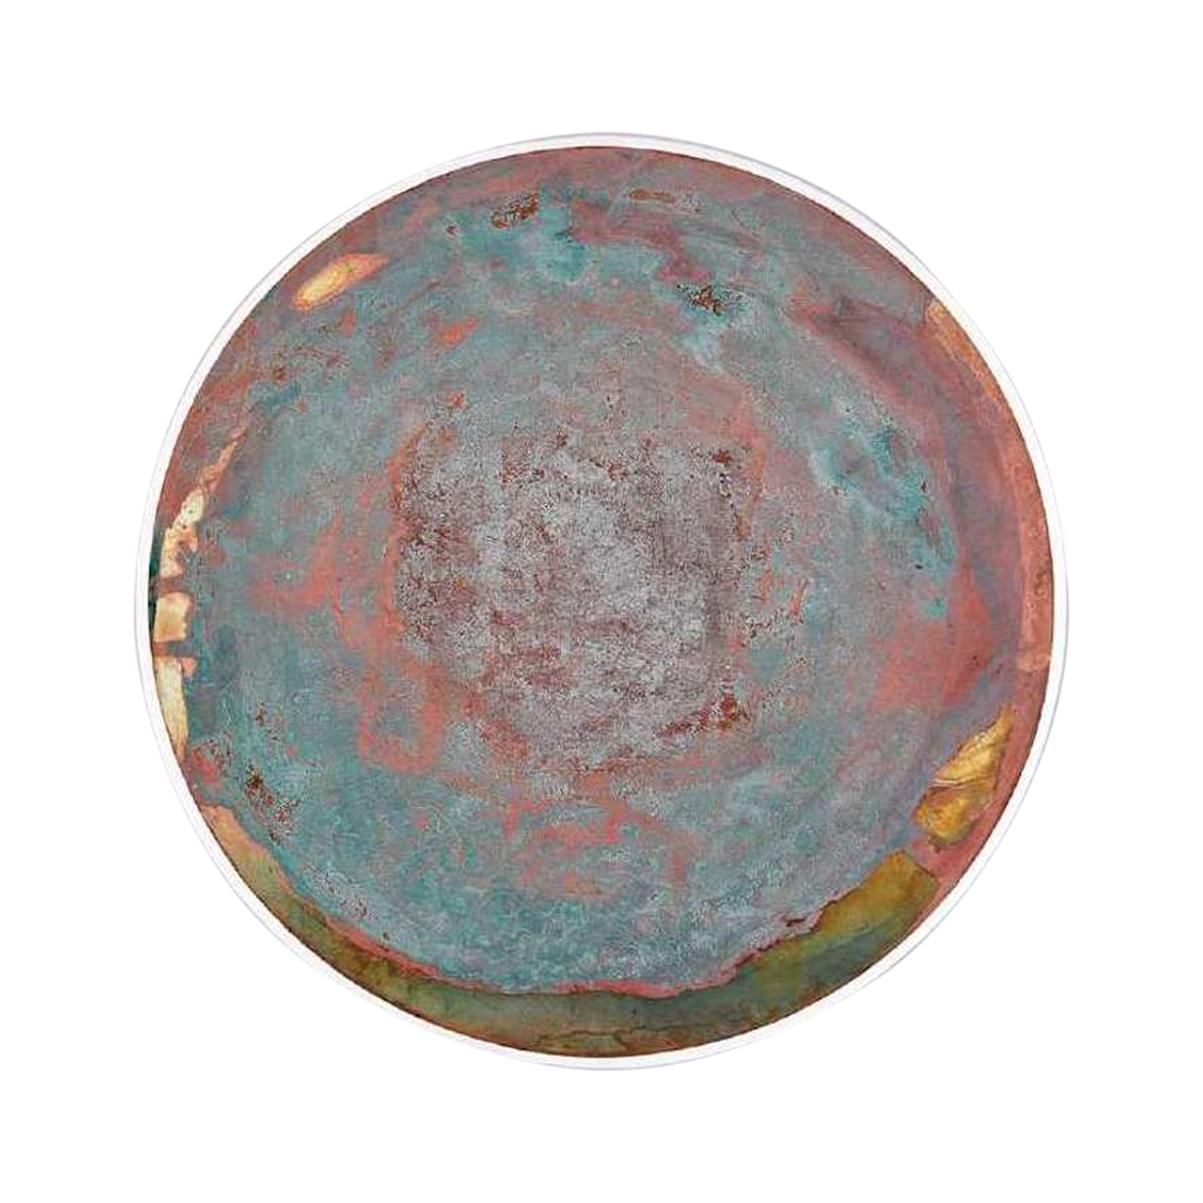 Copper & Stainless Steel Decor/ Plate, 'Star Dust 3.0 #8' by Daishi Luo For Sale